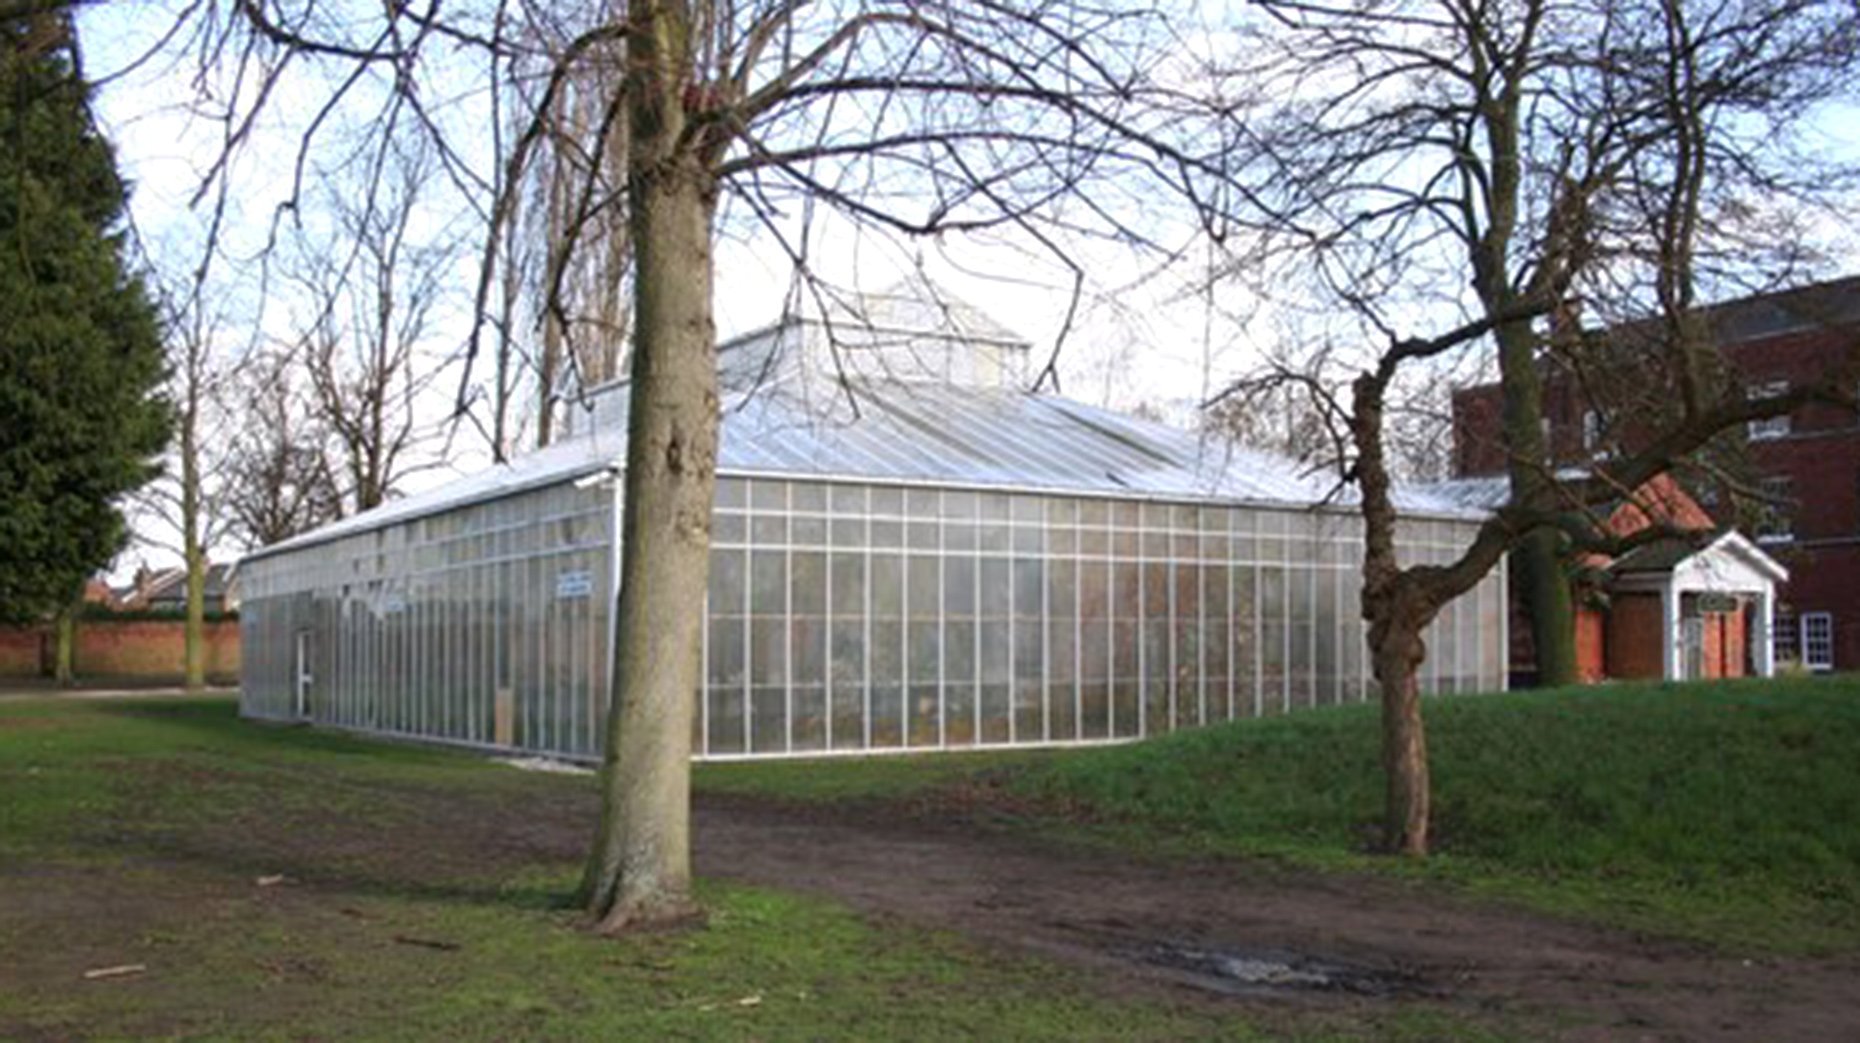 The Joseph Banks Conservatory at The Lawn in Lincoln. Photo: Richard Croft